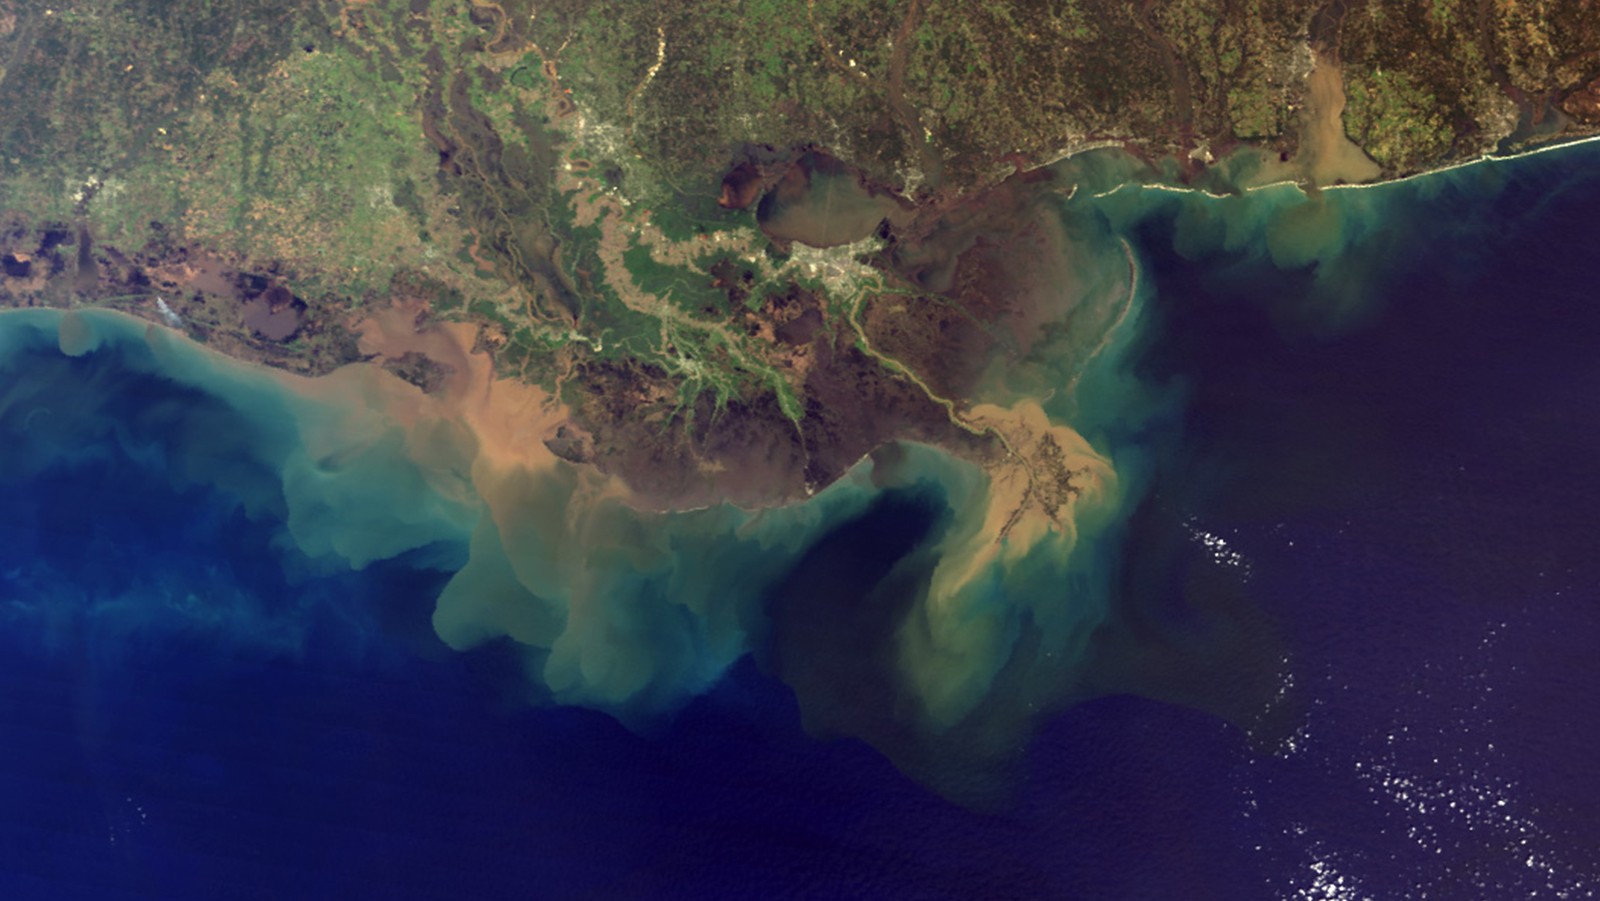 A satellite image showing the murky brown water of the Mississippi River plume mixing with the dark blue water of the Gulf two days after a rainstorm. Image Credit: NASA’s MODIS